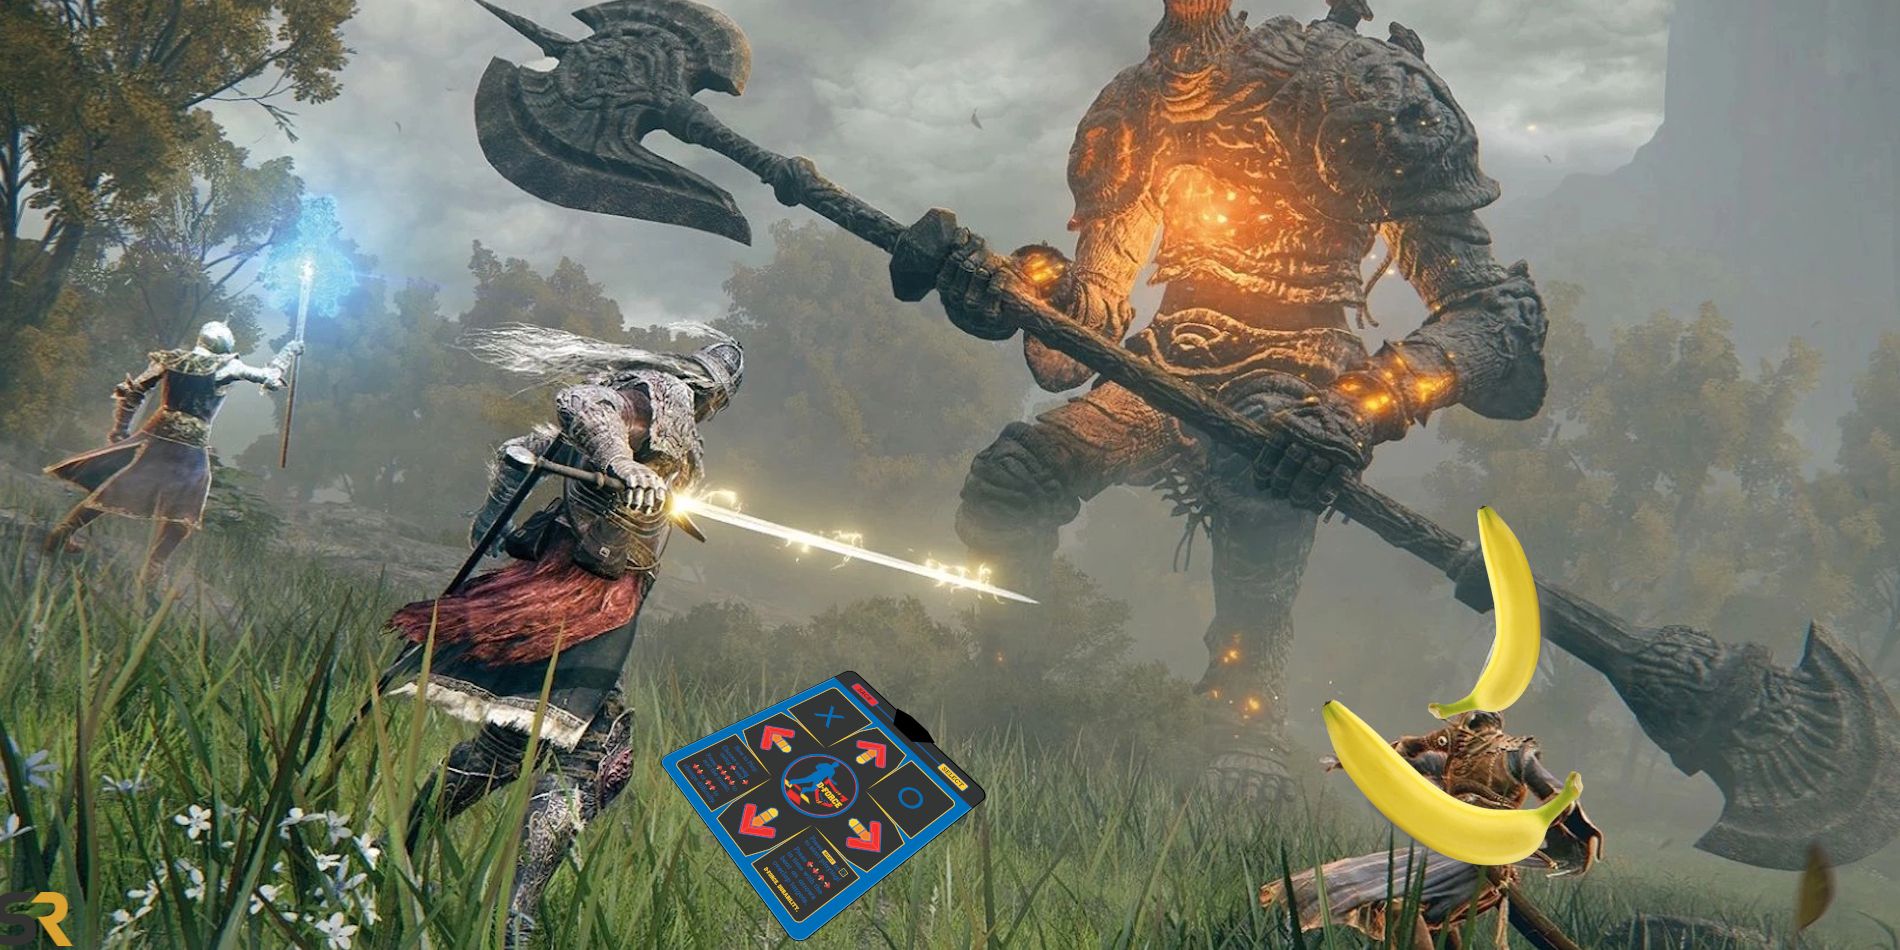 Three Elden Ring players stand in front of a giant enemy, one is equipped with a magic staff that's charging a spell, another is standing with a dance pad between them and their opponent, and the last is duel-wielding large bananas for weapons.